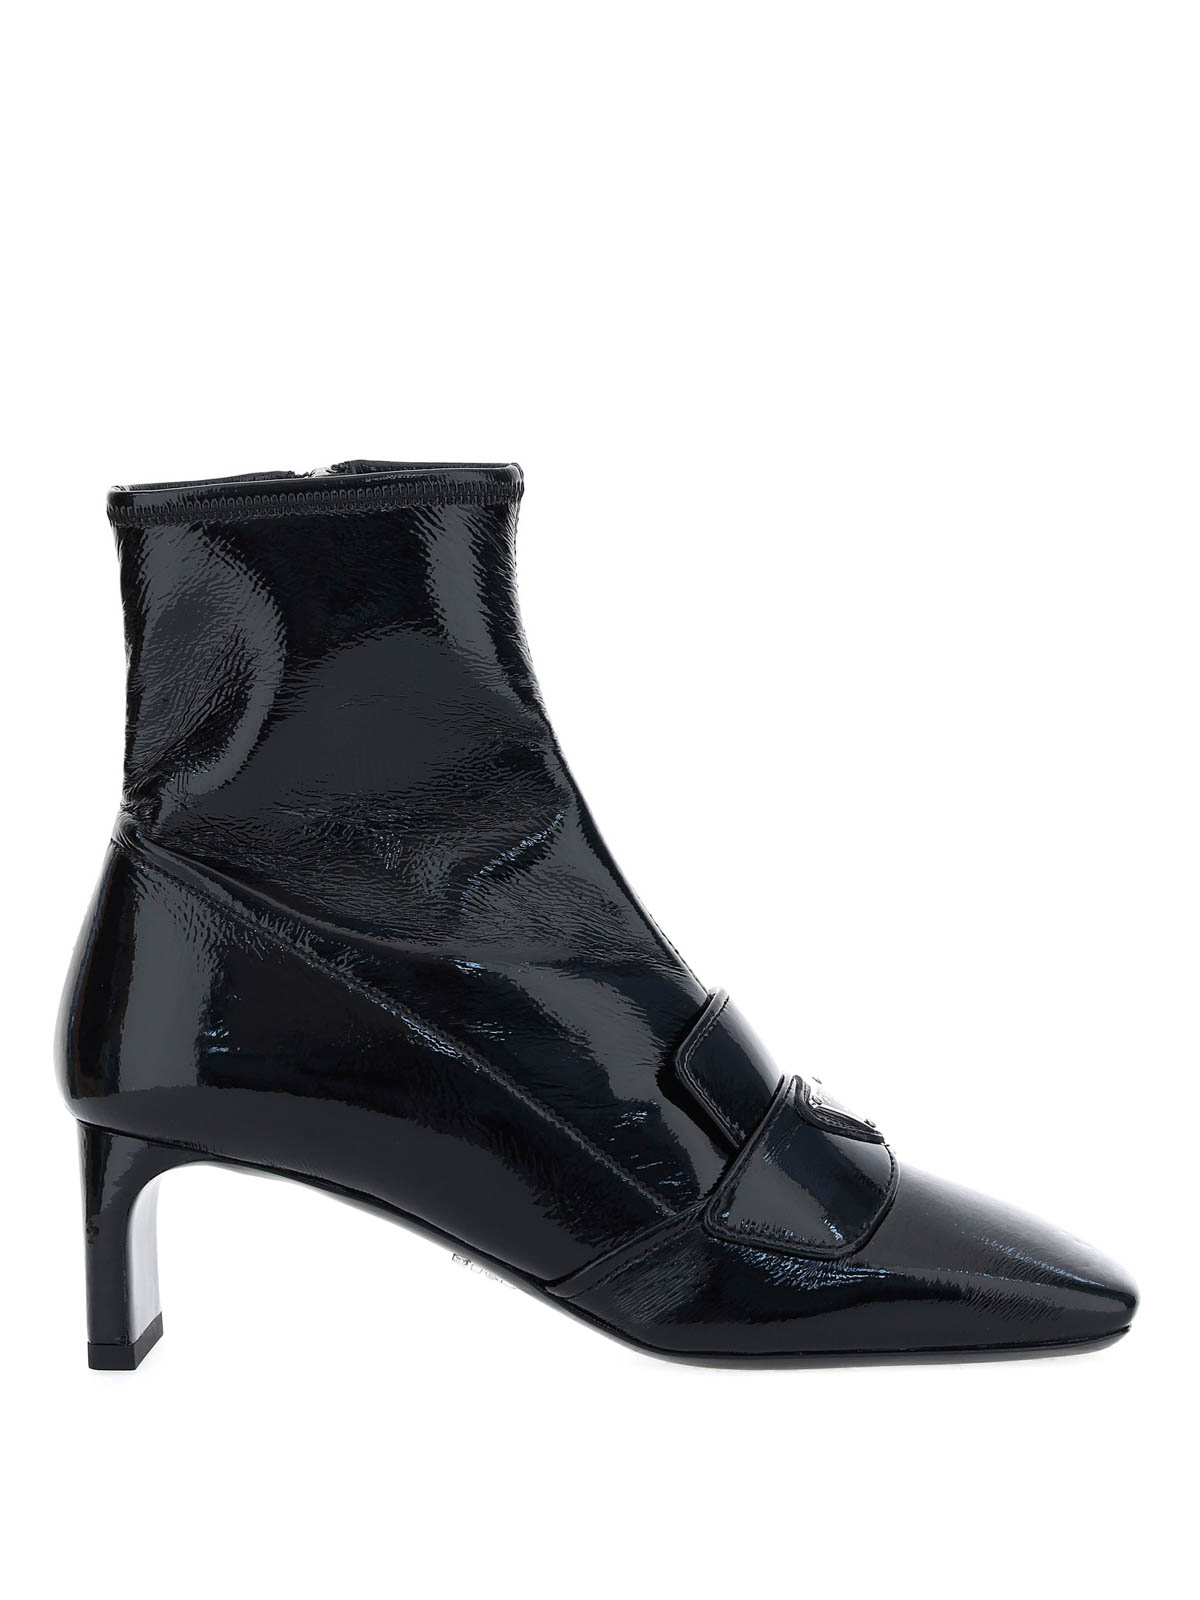 prada leather ankle boots